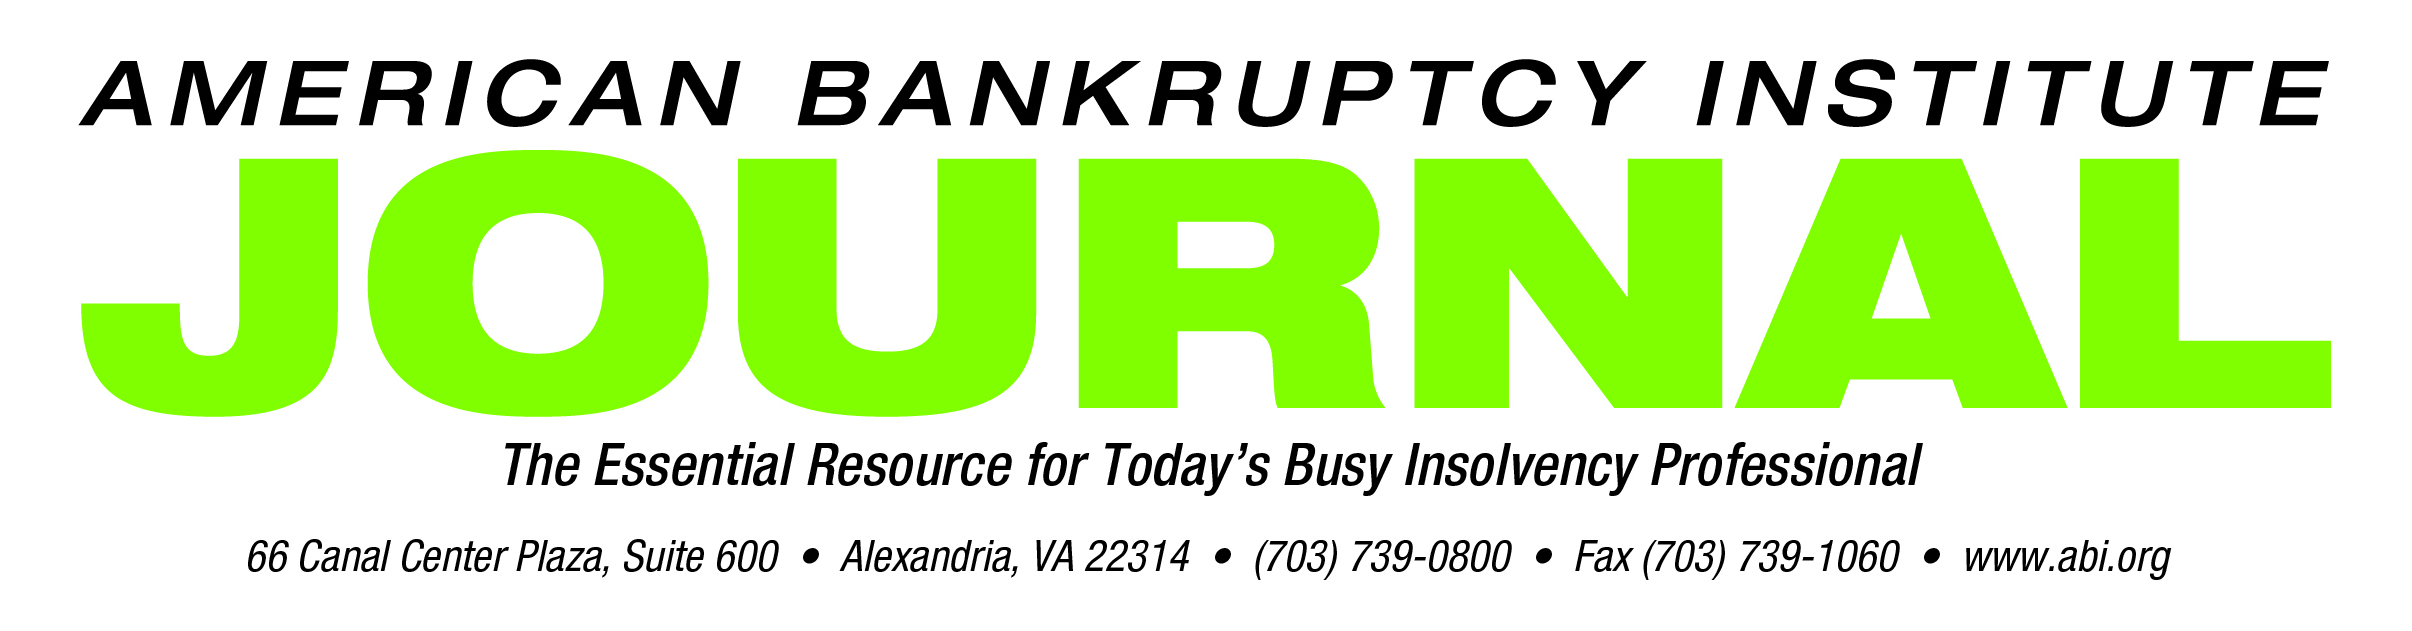 American Bankruptcy Institute Journal